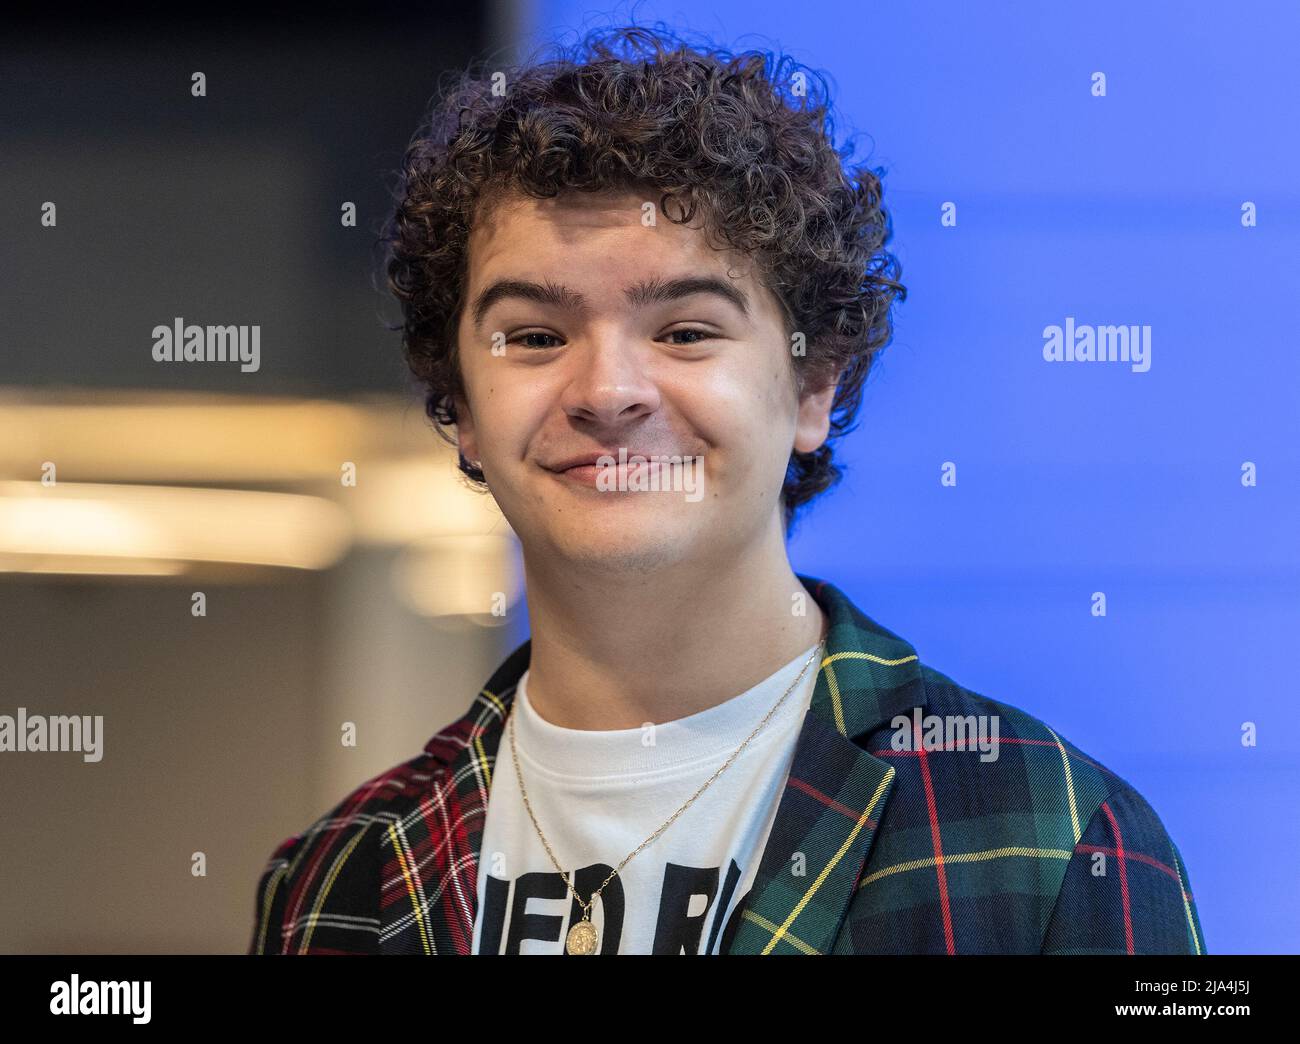 New York, United States. 26th May, 2022. Gaten Matarazzo from Stranger Things attends ceremonial lighting of Empire State Building ahead of global event for season 4 premiere. (Photo by Lev Radin/Pacific Press) Credit: Pacific Press Media Production Corp./Alamy Live News Stock Photo